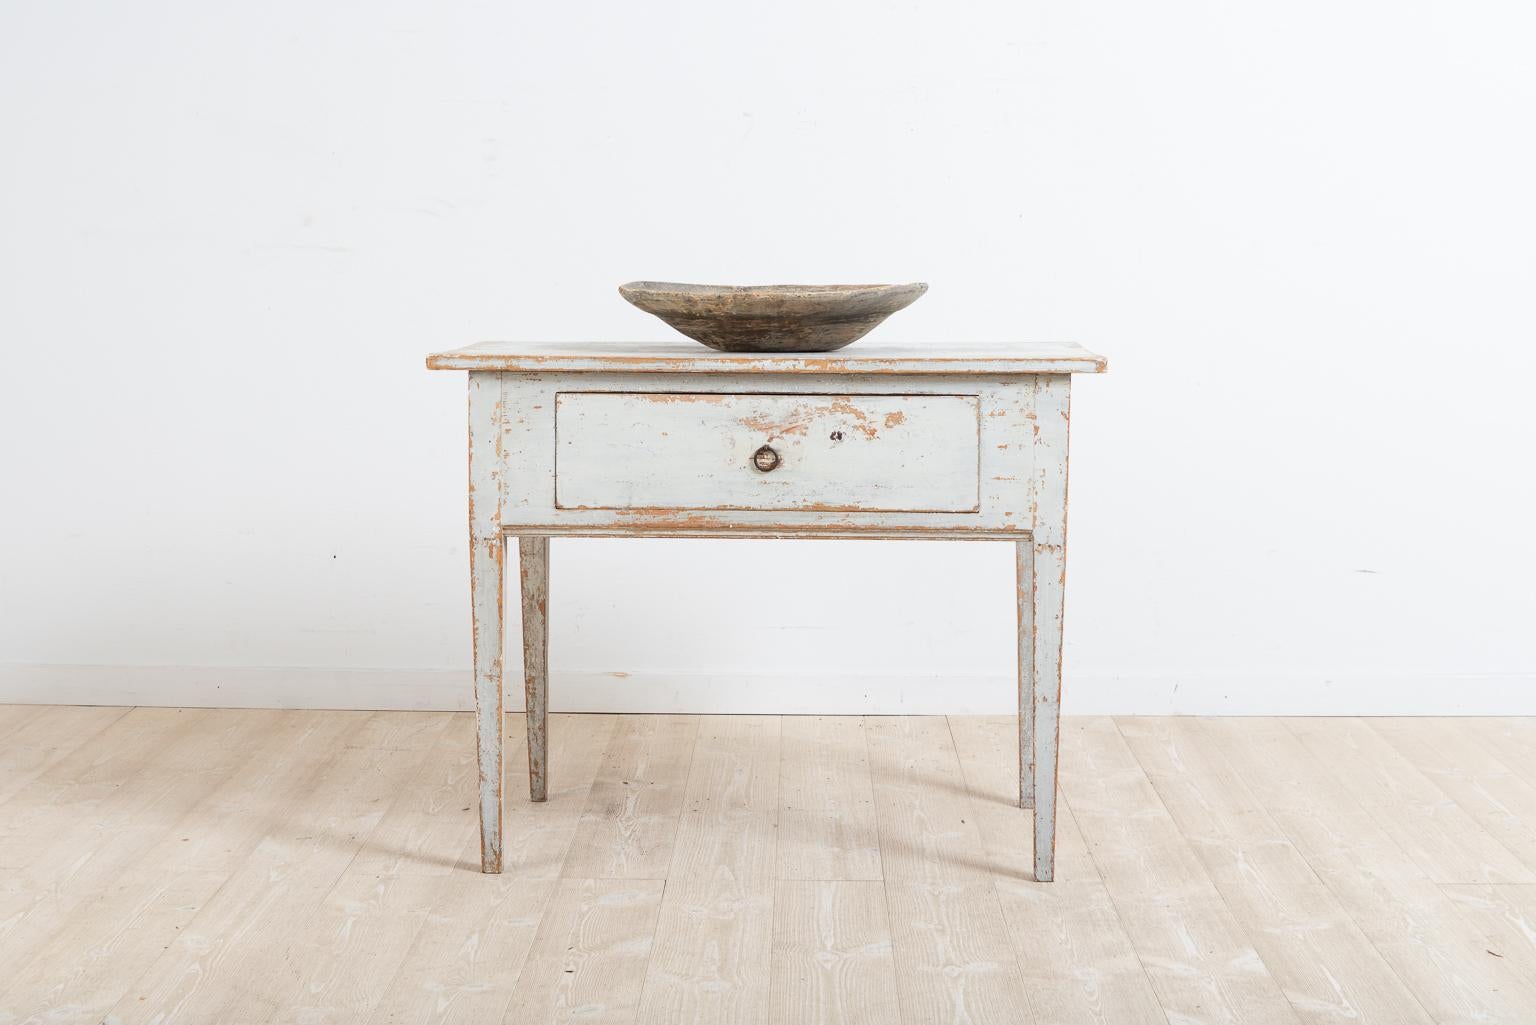 Late 18th century side table from northern Sweden. The table is provincial Gustavian and the frame is healthy and solid. Dry scraped to the original first layer of paint. With straight legs and a large drawer. The table works well as a side table